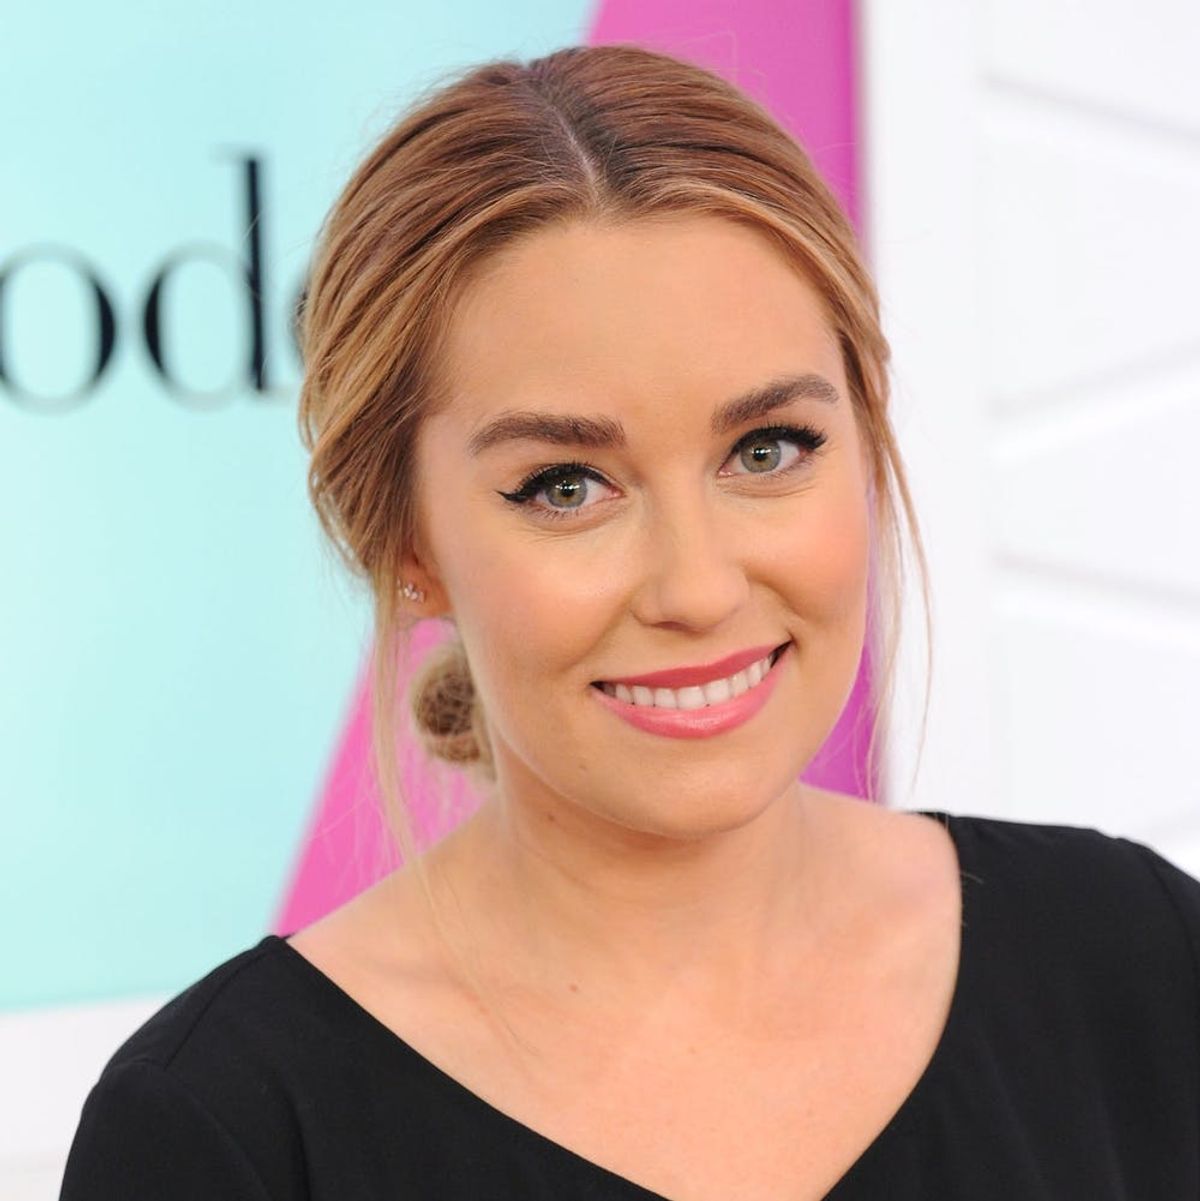 Lo Bosworth + Lauren Conrad Have an Unexpected Hobby in Common